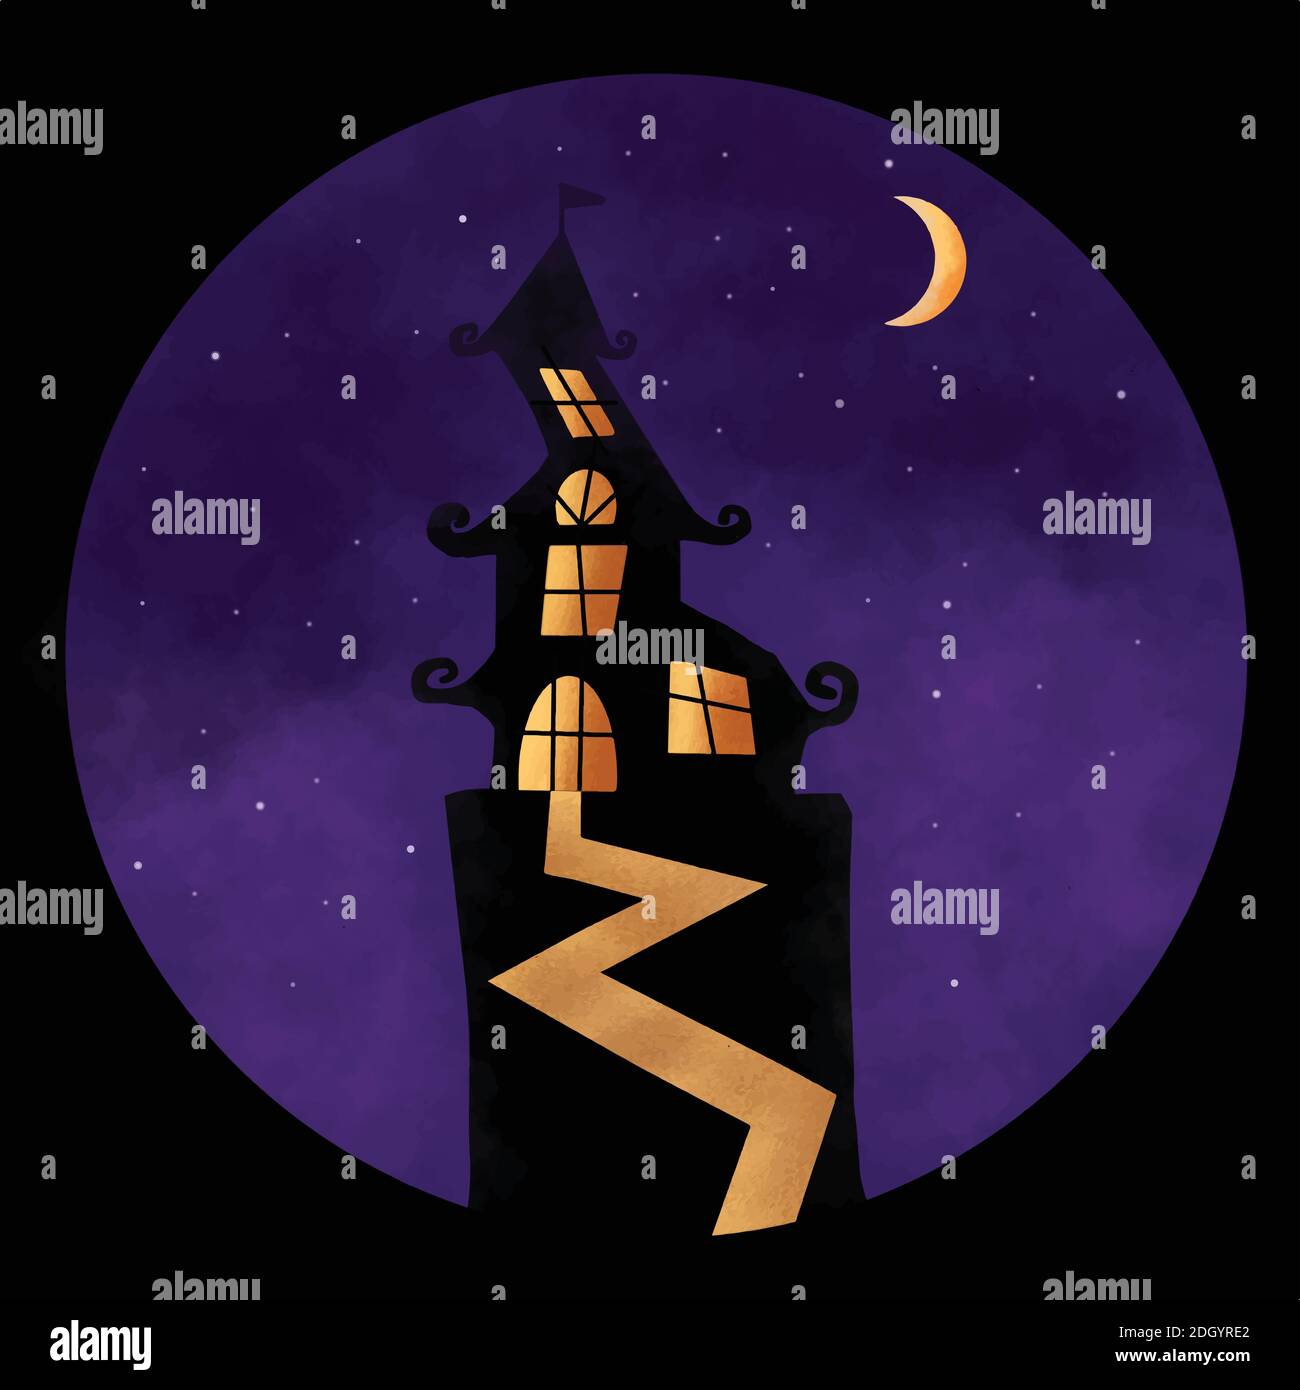 Design inspirations happy hallowen, very suitable for cards, or baground, can also be a wallpaper. Stock Vector